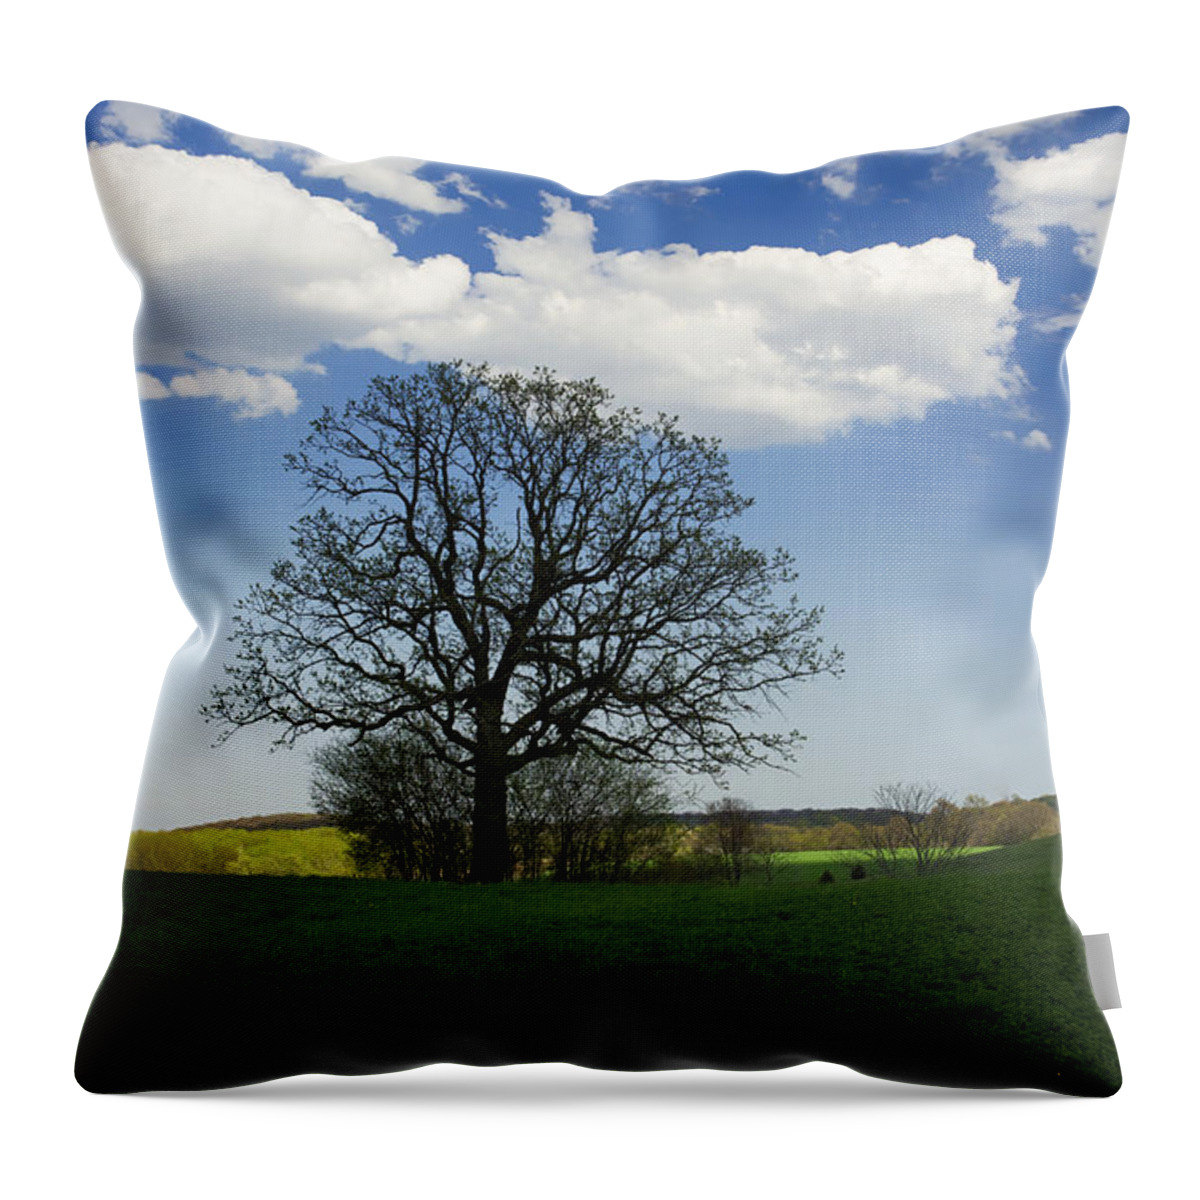  Throw Pillow featuring the photograph Shade by Dan Hefle